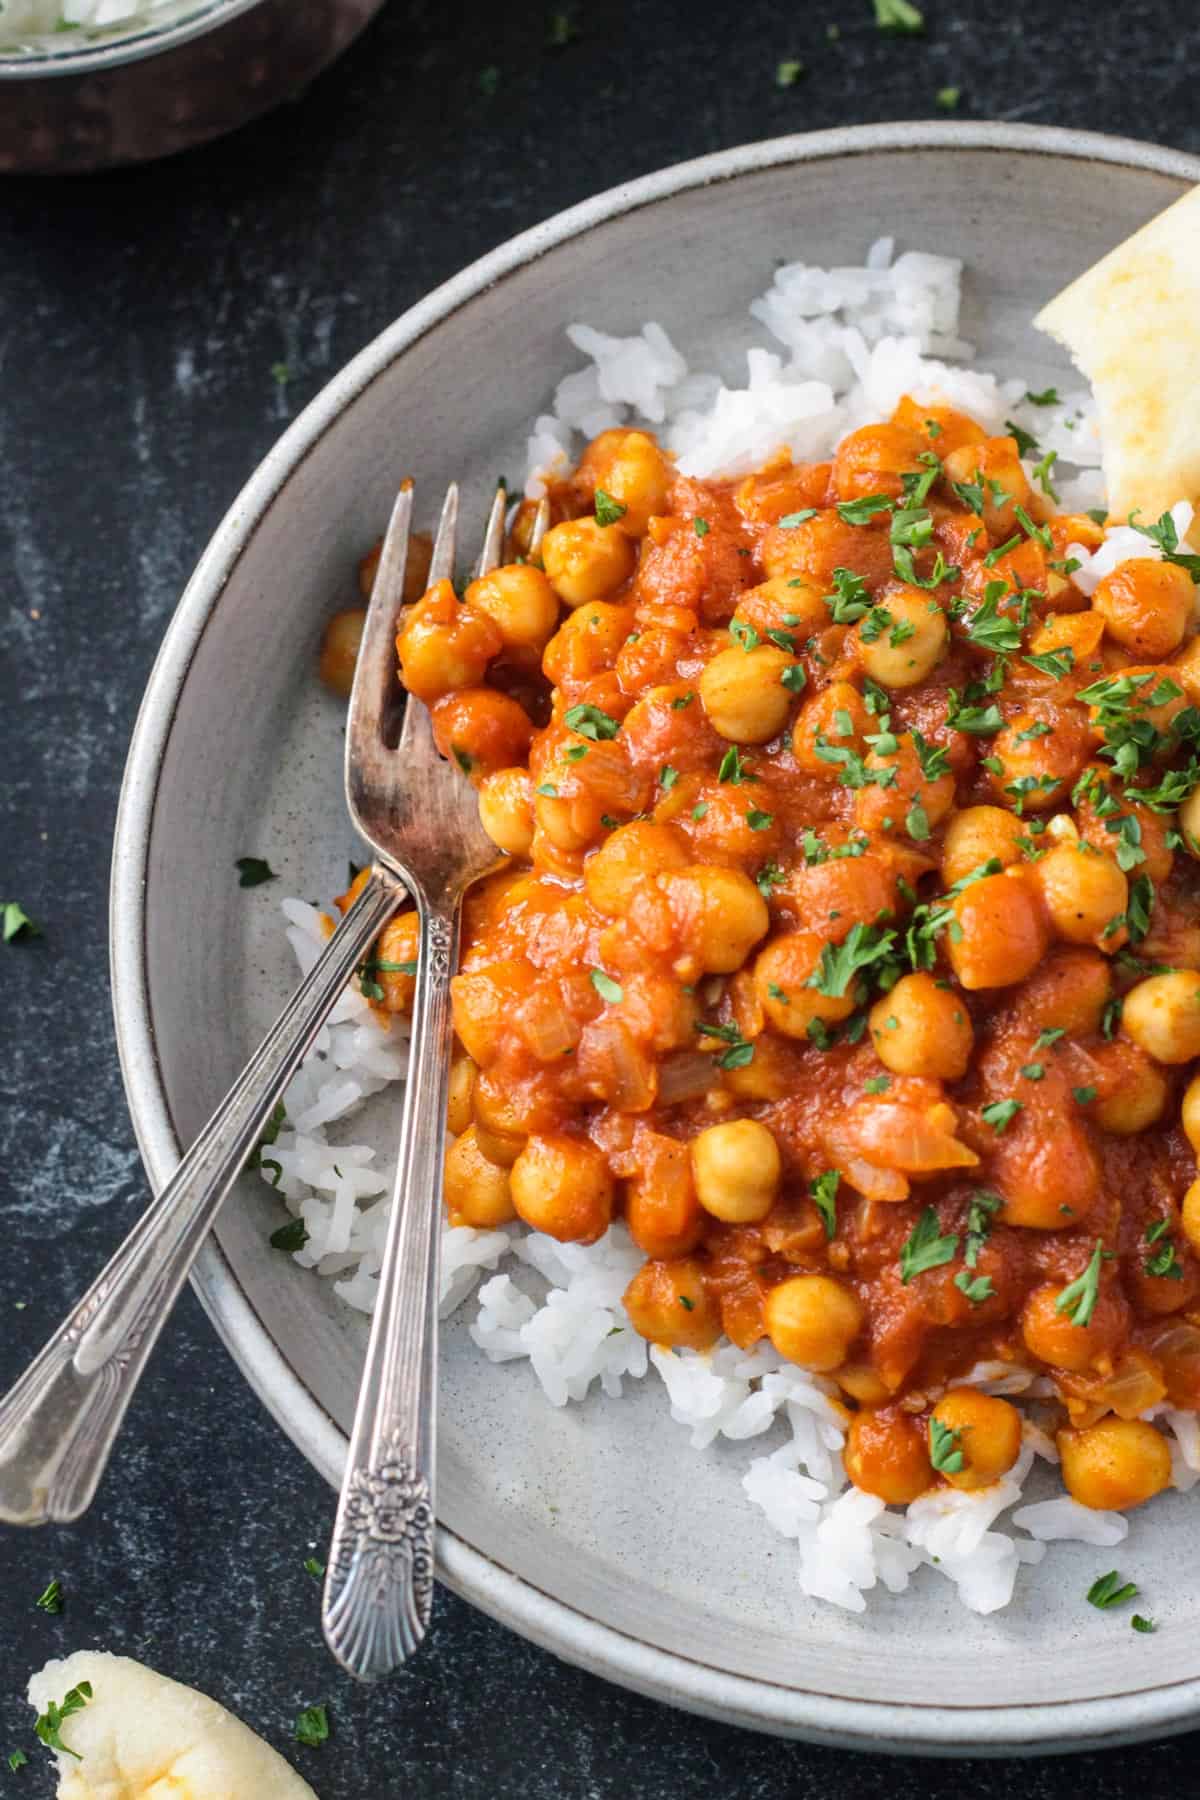 Two forks on a plate of vegan tikka masala with chickpeas and rice.